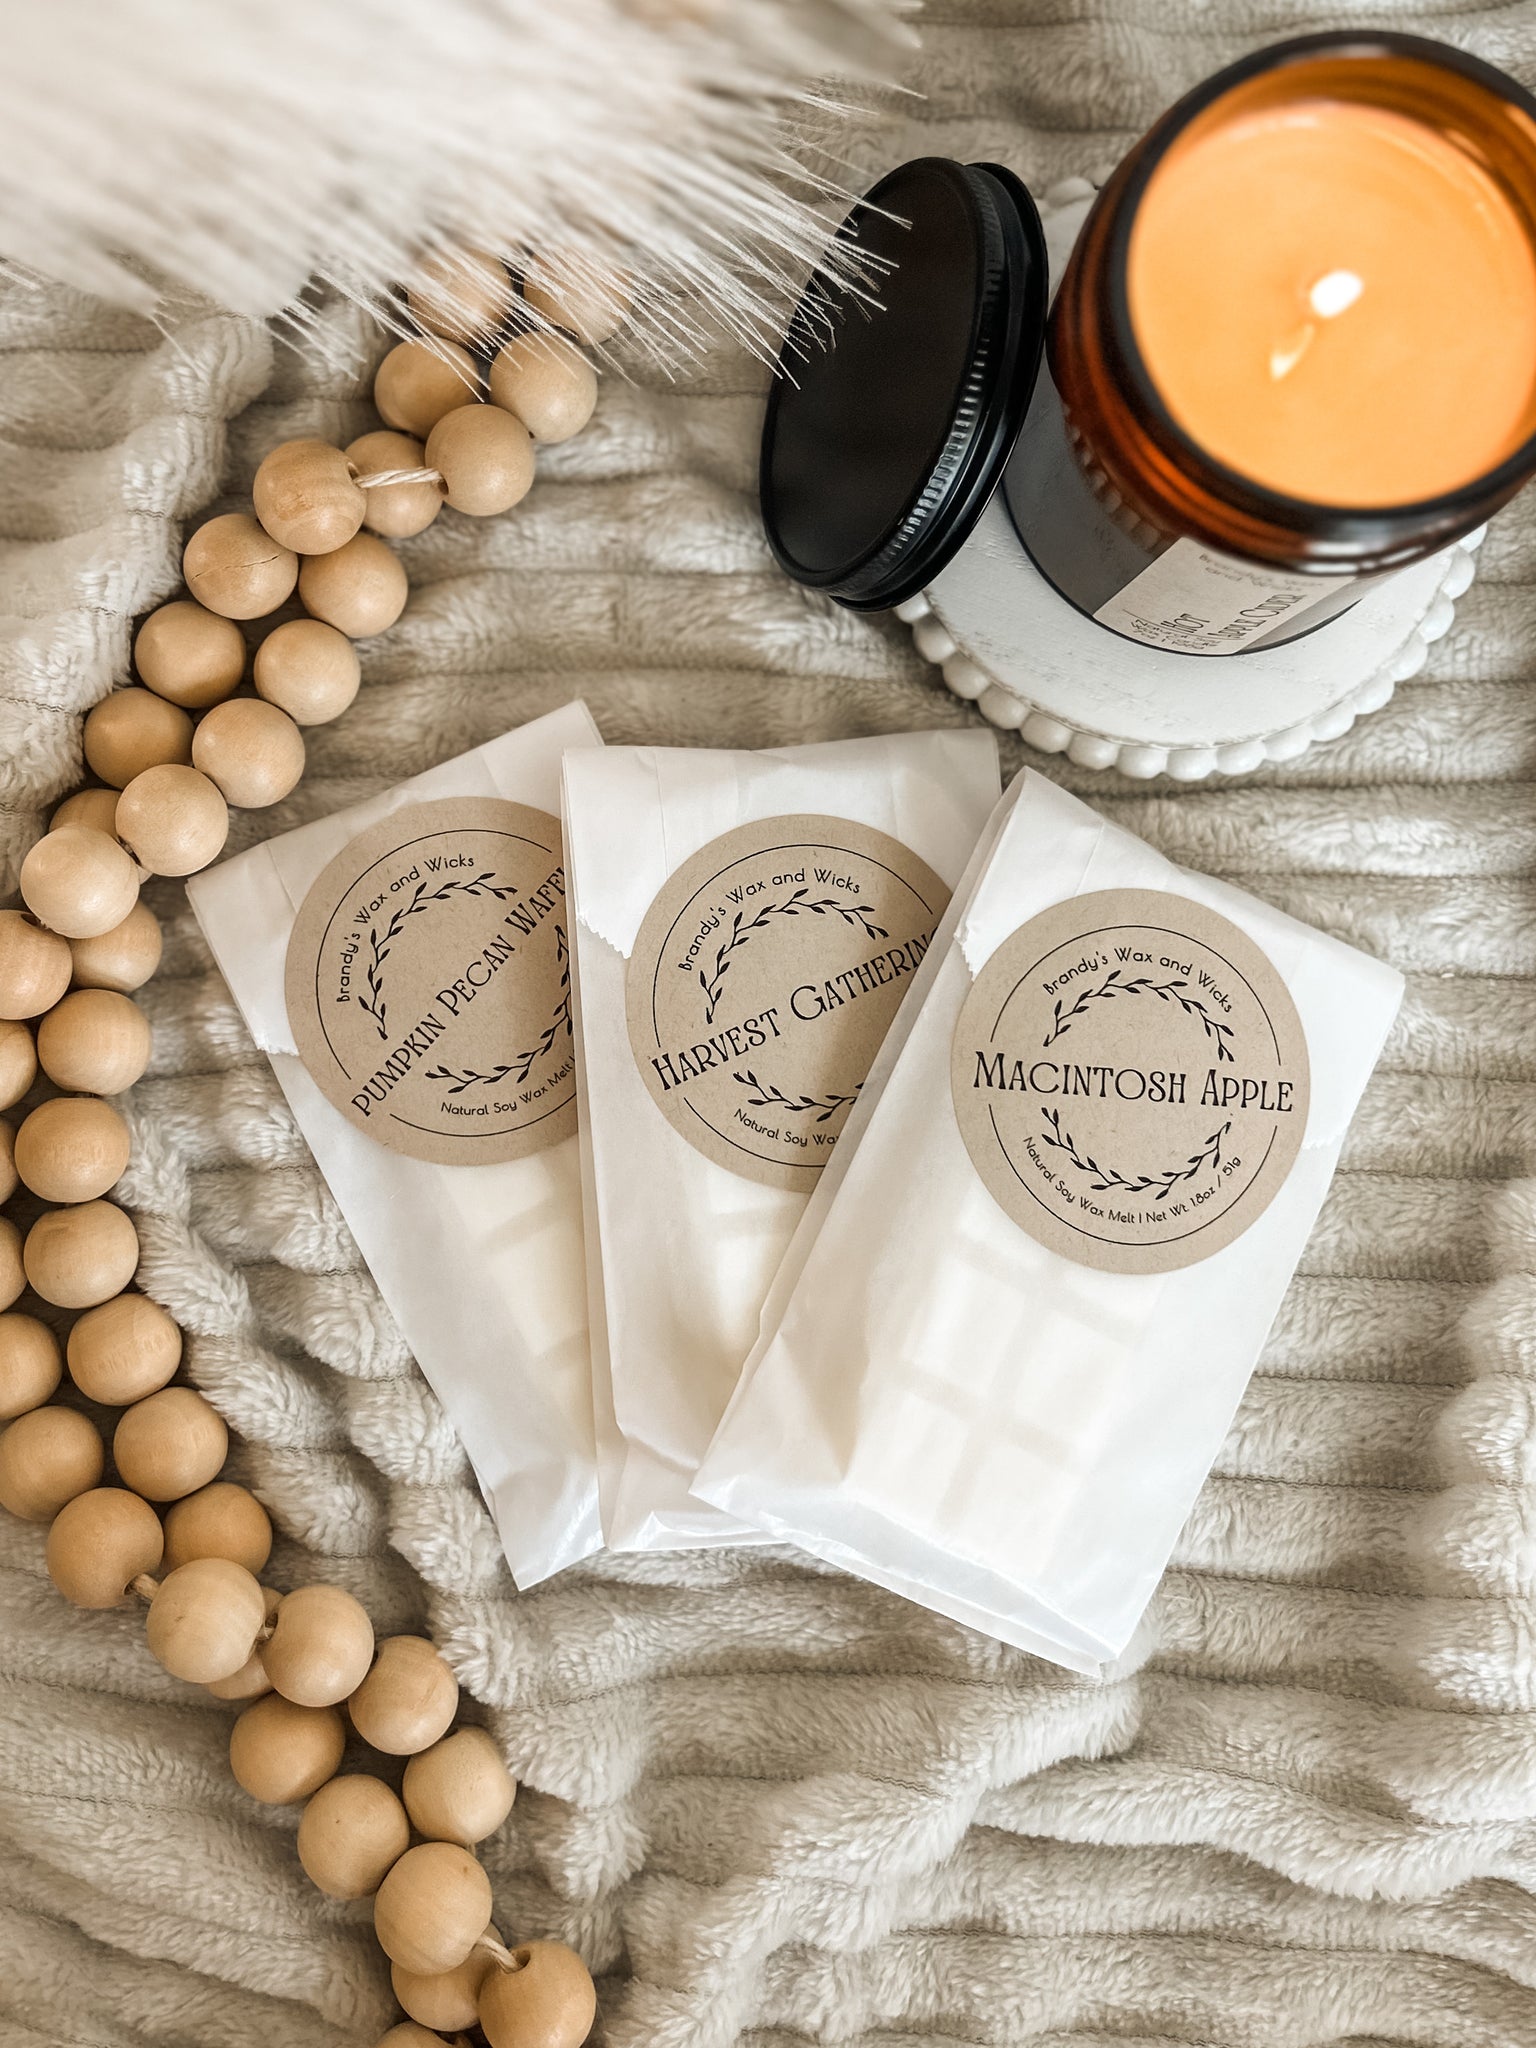 Soy Wax Melts Coffee Haus